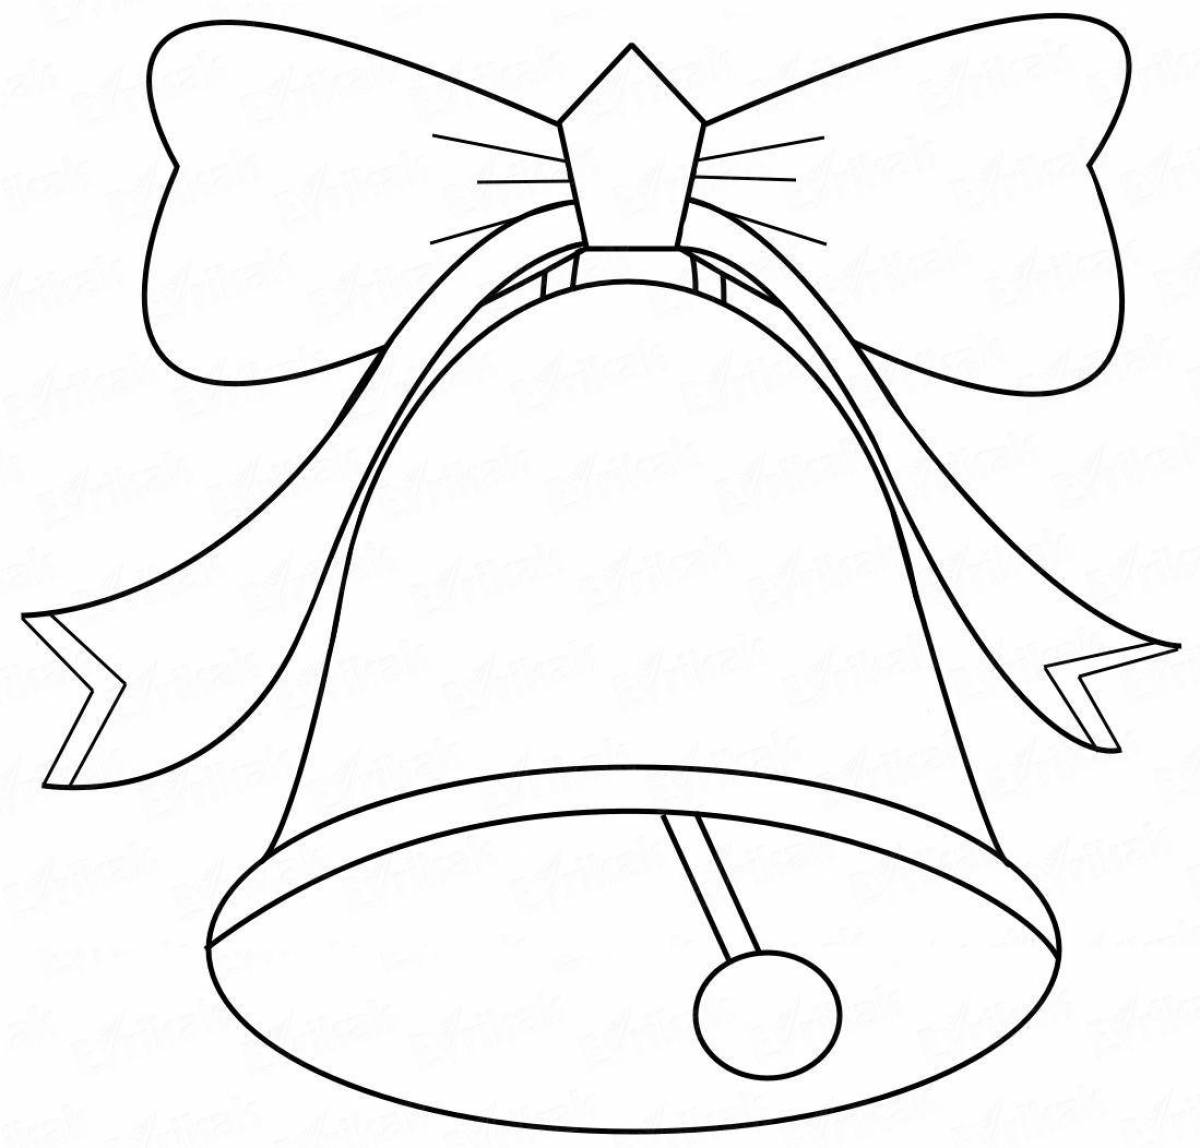 Coloring page violent school bell